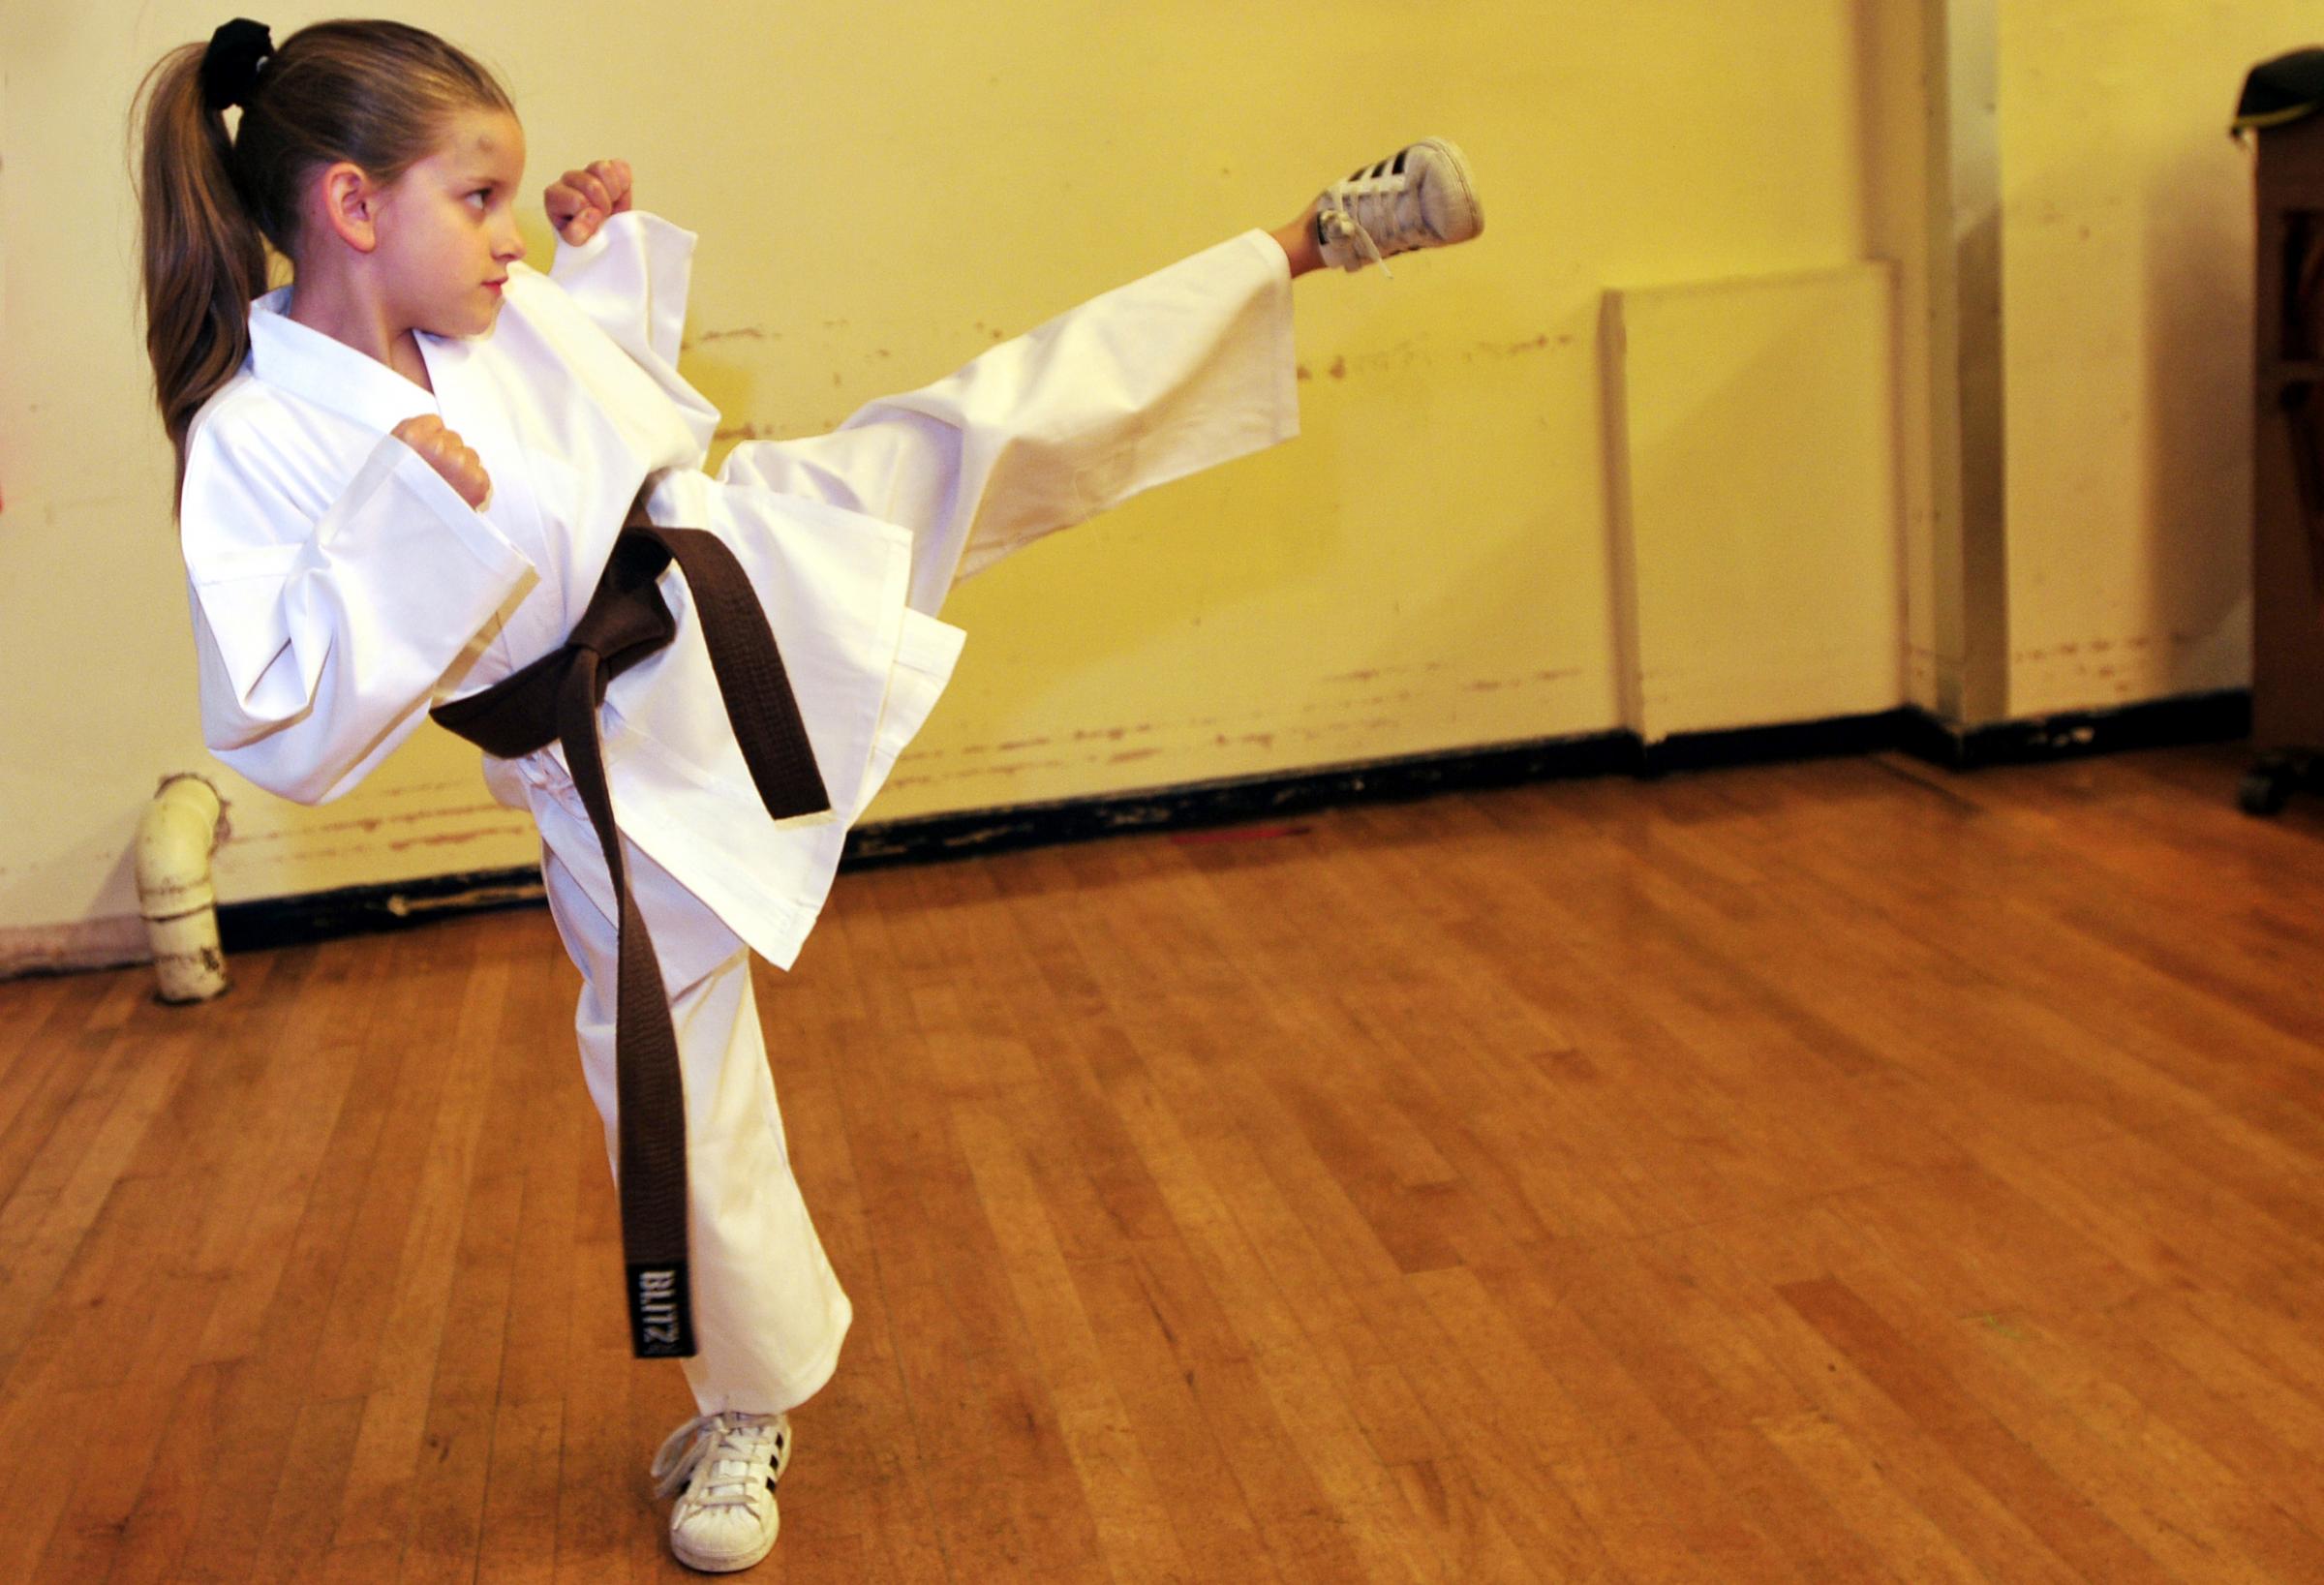 Karate kid given boost by coach after thieves steal expensive kit from mum's BMW